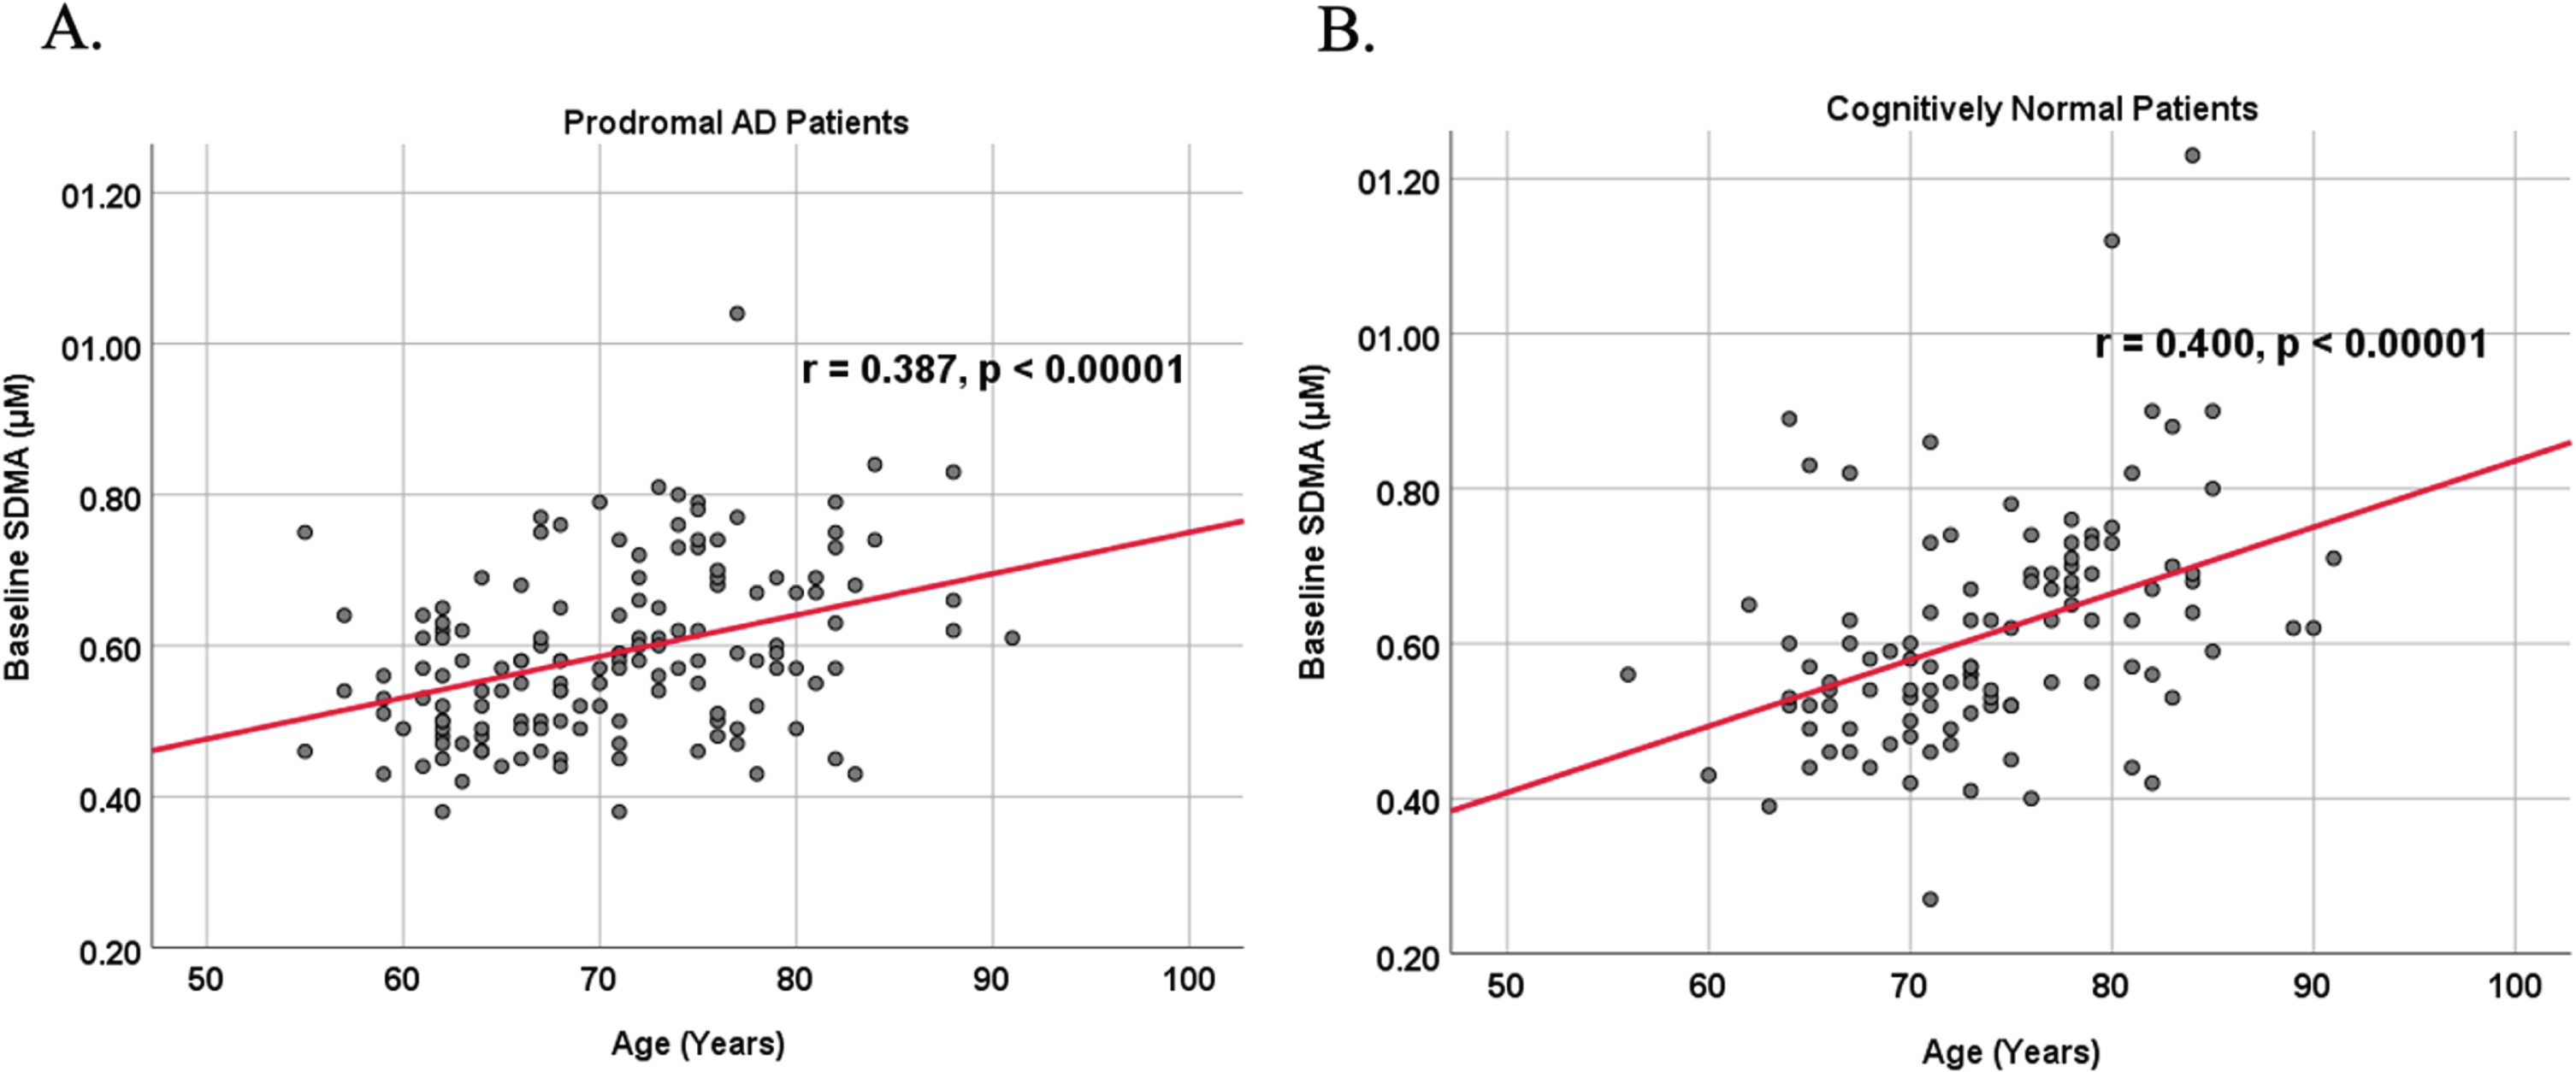 Associations between baseline SDMA and age in cognitively unimpaired control and prodromal participants. Scatterplots above are uncorrected for sex, education, and APOE. A) SDMA versus Age in prodromal AD dementia participants (r = 0.387, p < 0.00001). B) SDMA versus Age in cognitively unimpaired control participants (r = 0.400, p < 0.00001).